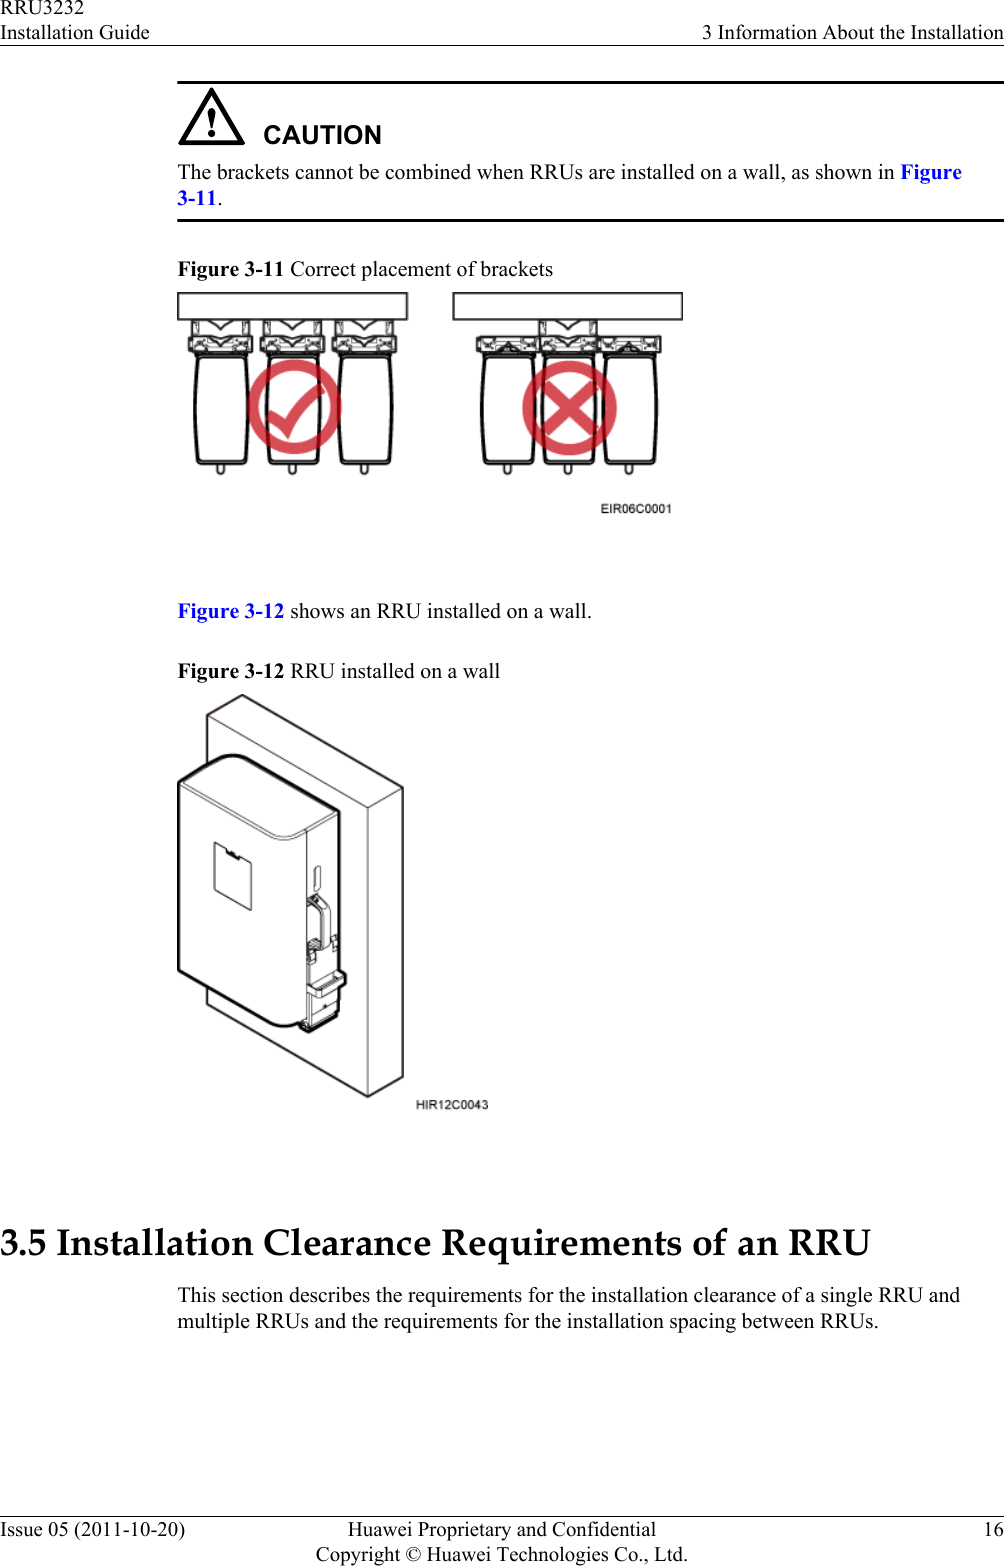 CAUTIONThe brackets cannot be combined when RRUs are installed on a wall, as shown in Figure3-11.Figure 3-11 Correct placement of brackets Figure 3-12 shows an RRU installed on a wall.Figure 3-12 RRU installed on a wall 3.5 Installation Clearance Requirements of an RRUThis section describes the requirements for the installation clearance of a single RRU andmultiple RRUs and the requirements for the installation spacing between RRUs.RRU3232Installation Guide 3 Information About the InstallationIssue 05 (2011-10-20) Huawei Proprietary and ConfidentialCopyright © Huawei Technologies Co., Ltd.16